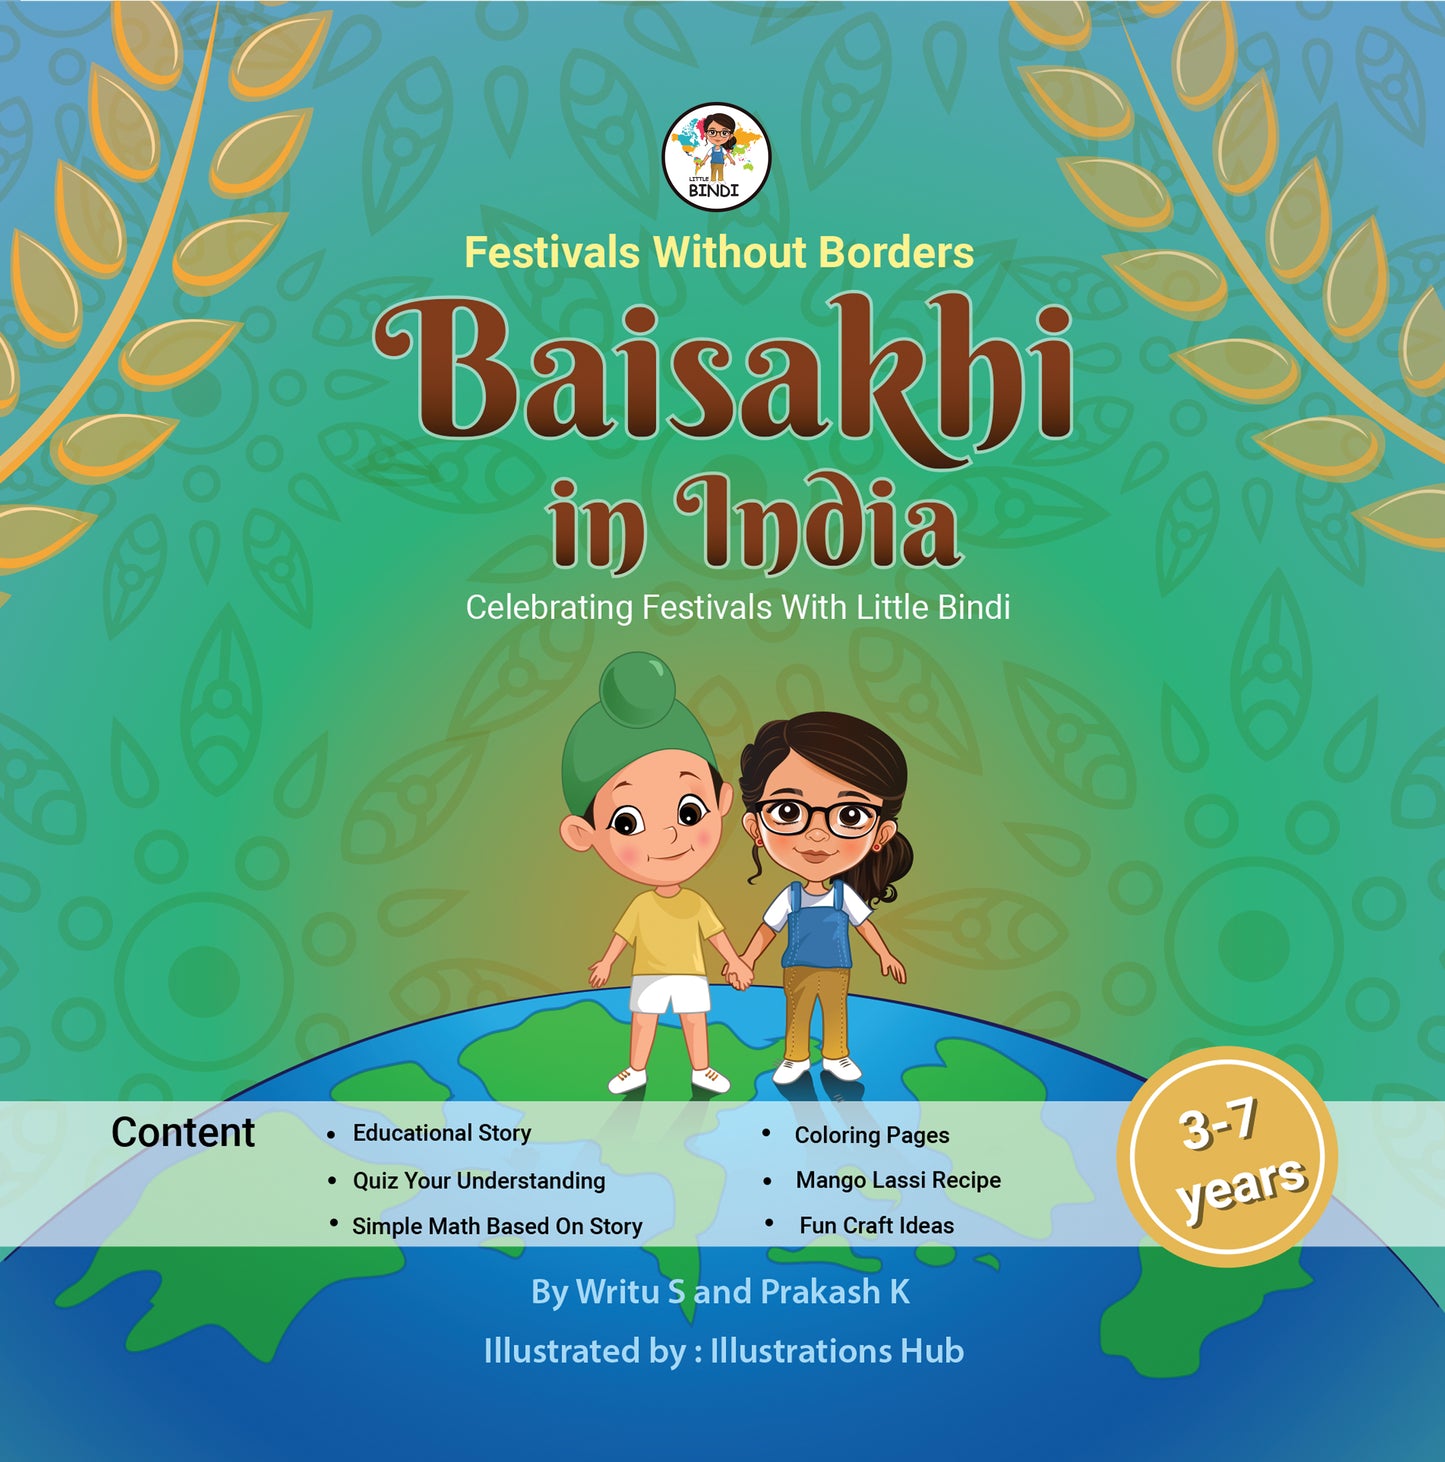 Baisakhi in India - Activity book with story, crafts, recipes, fun facts, coloring pages and quizzes